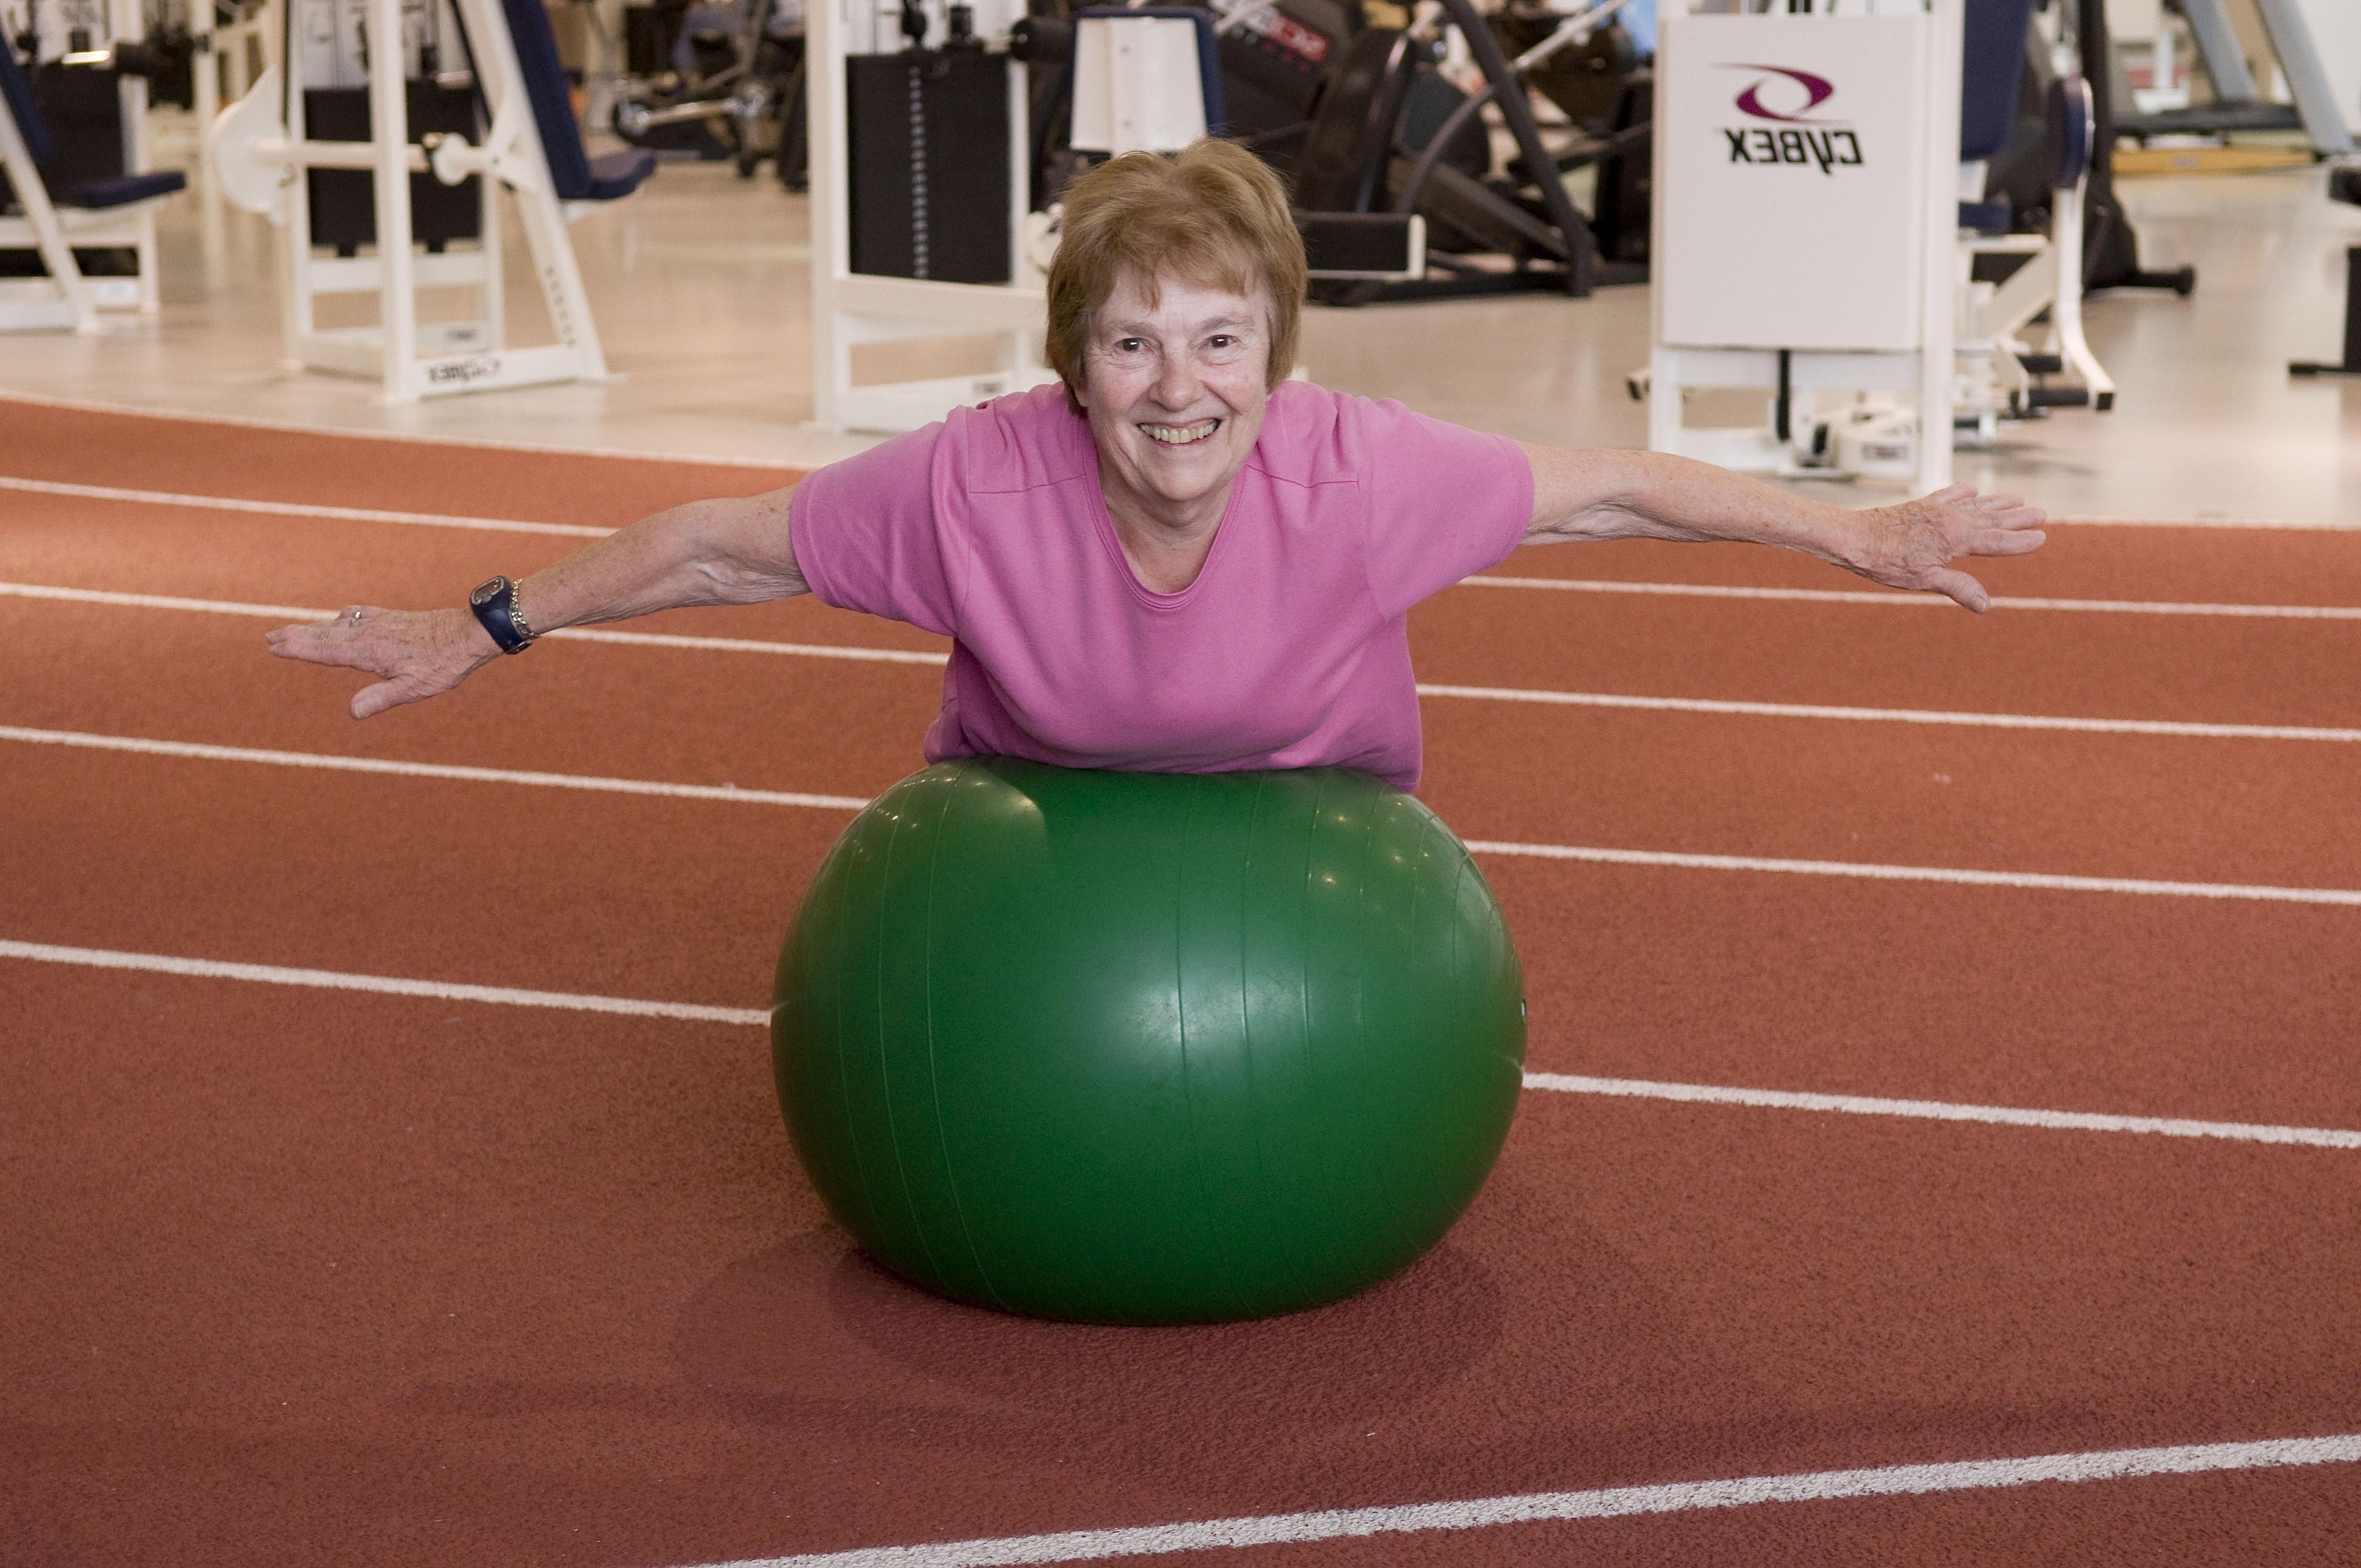 Participant on stability ball